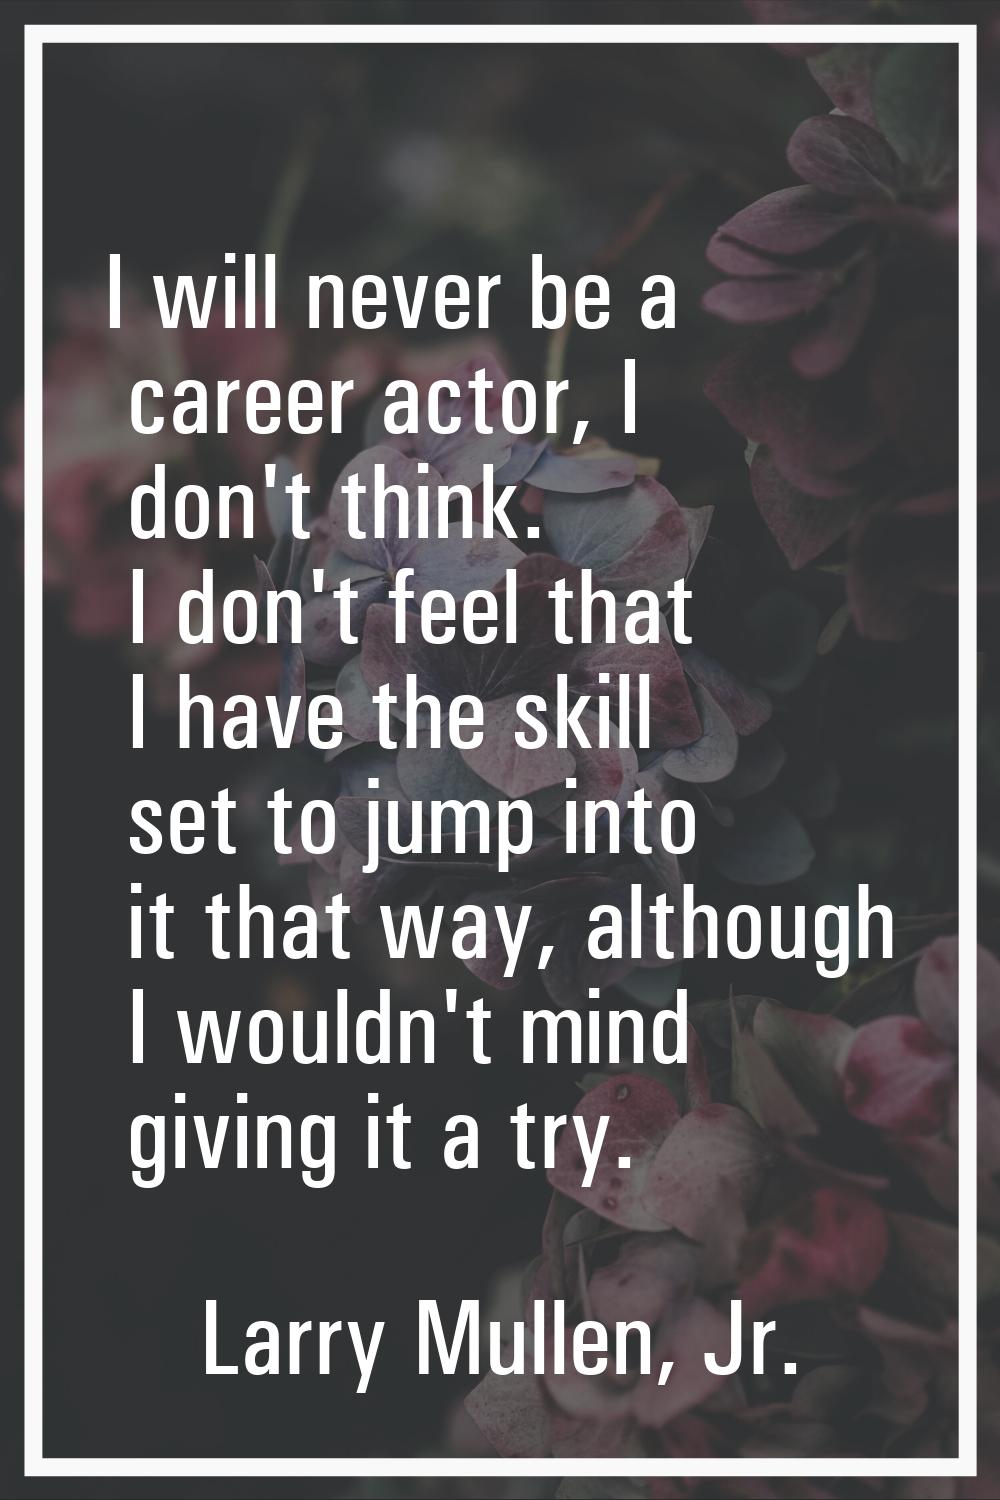 I will never be a career actor, I don't think. I don't feel that I have the skill set to jump into 